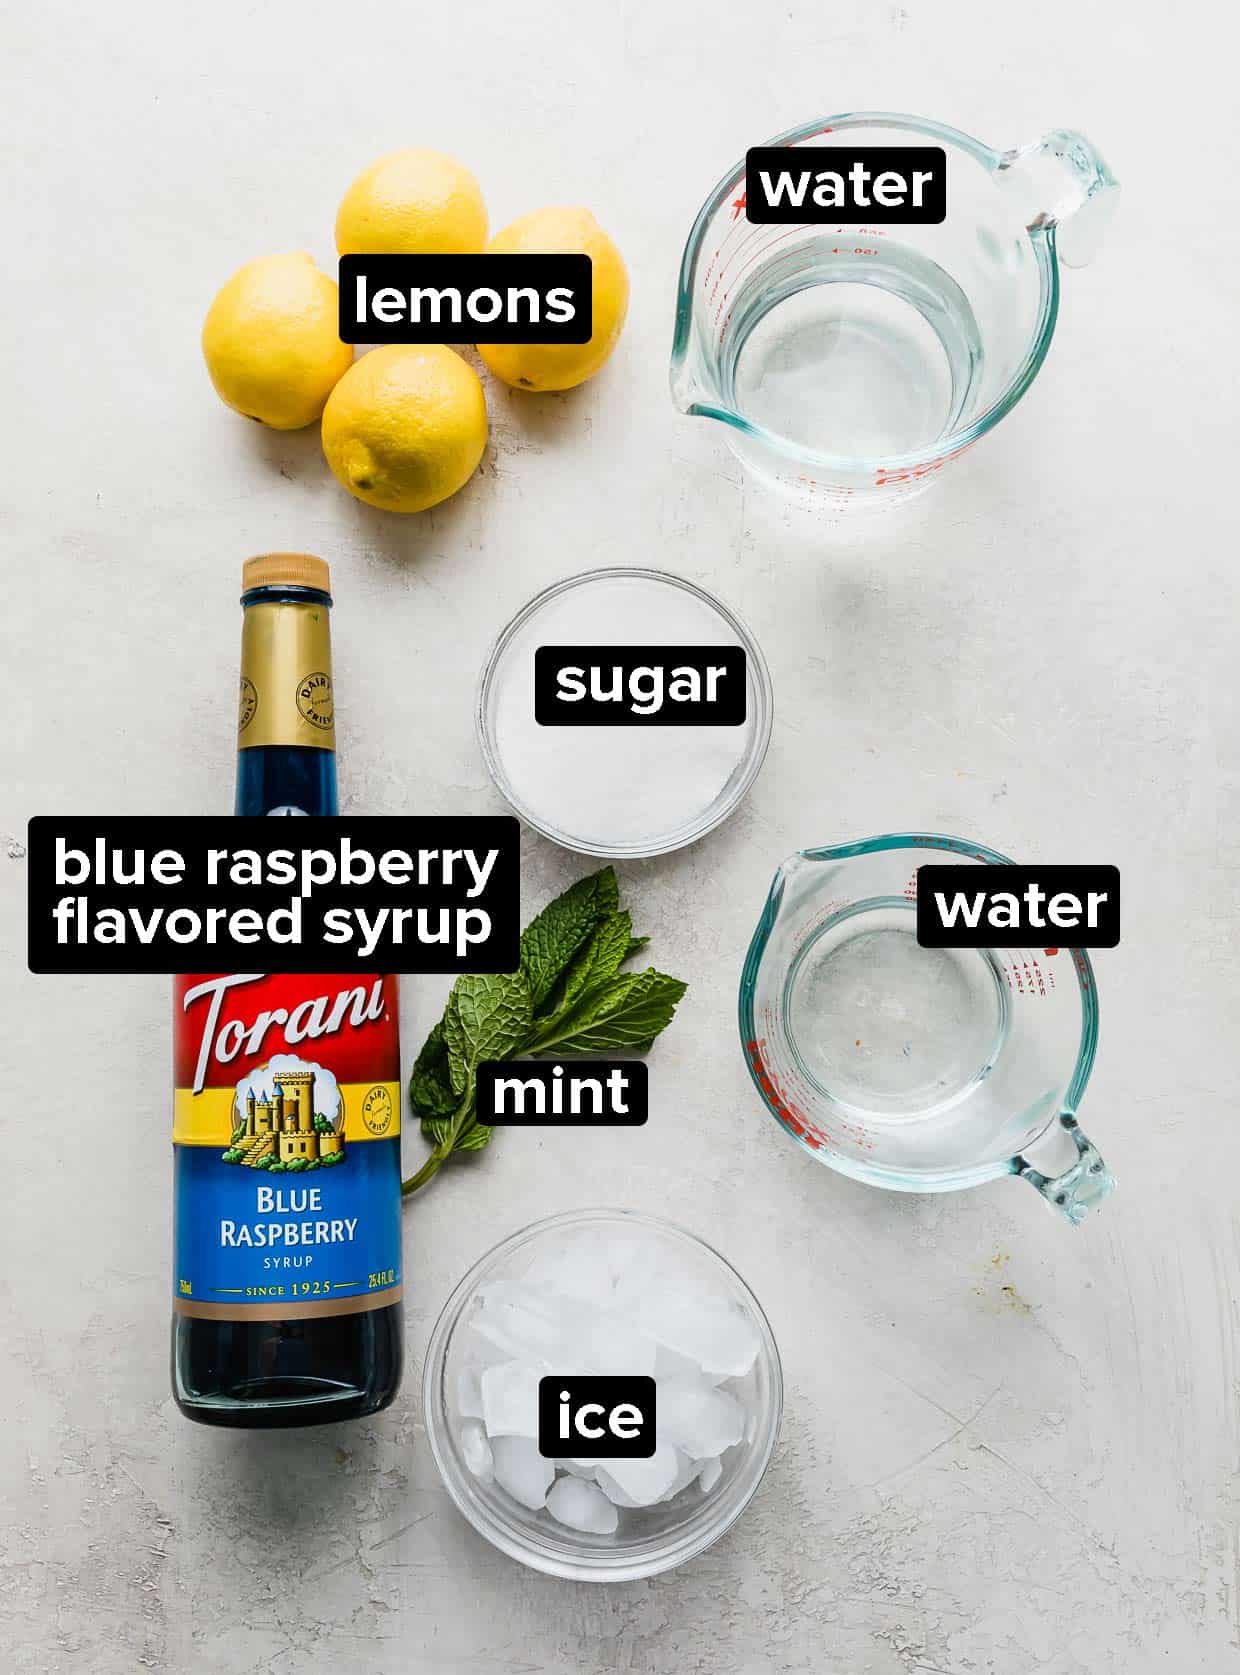 Ingredients used to make blue raspberry lemonade on a gray and white background.